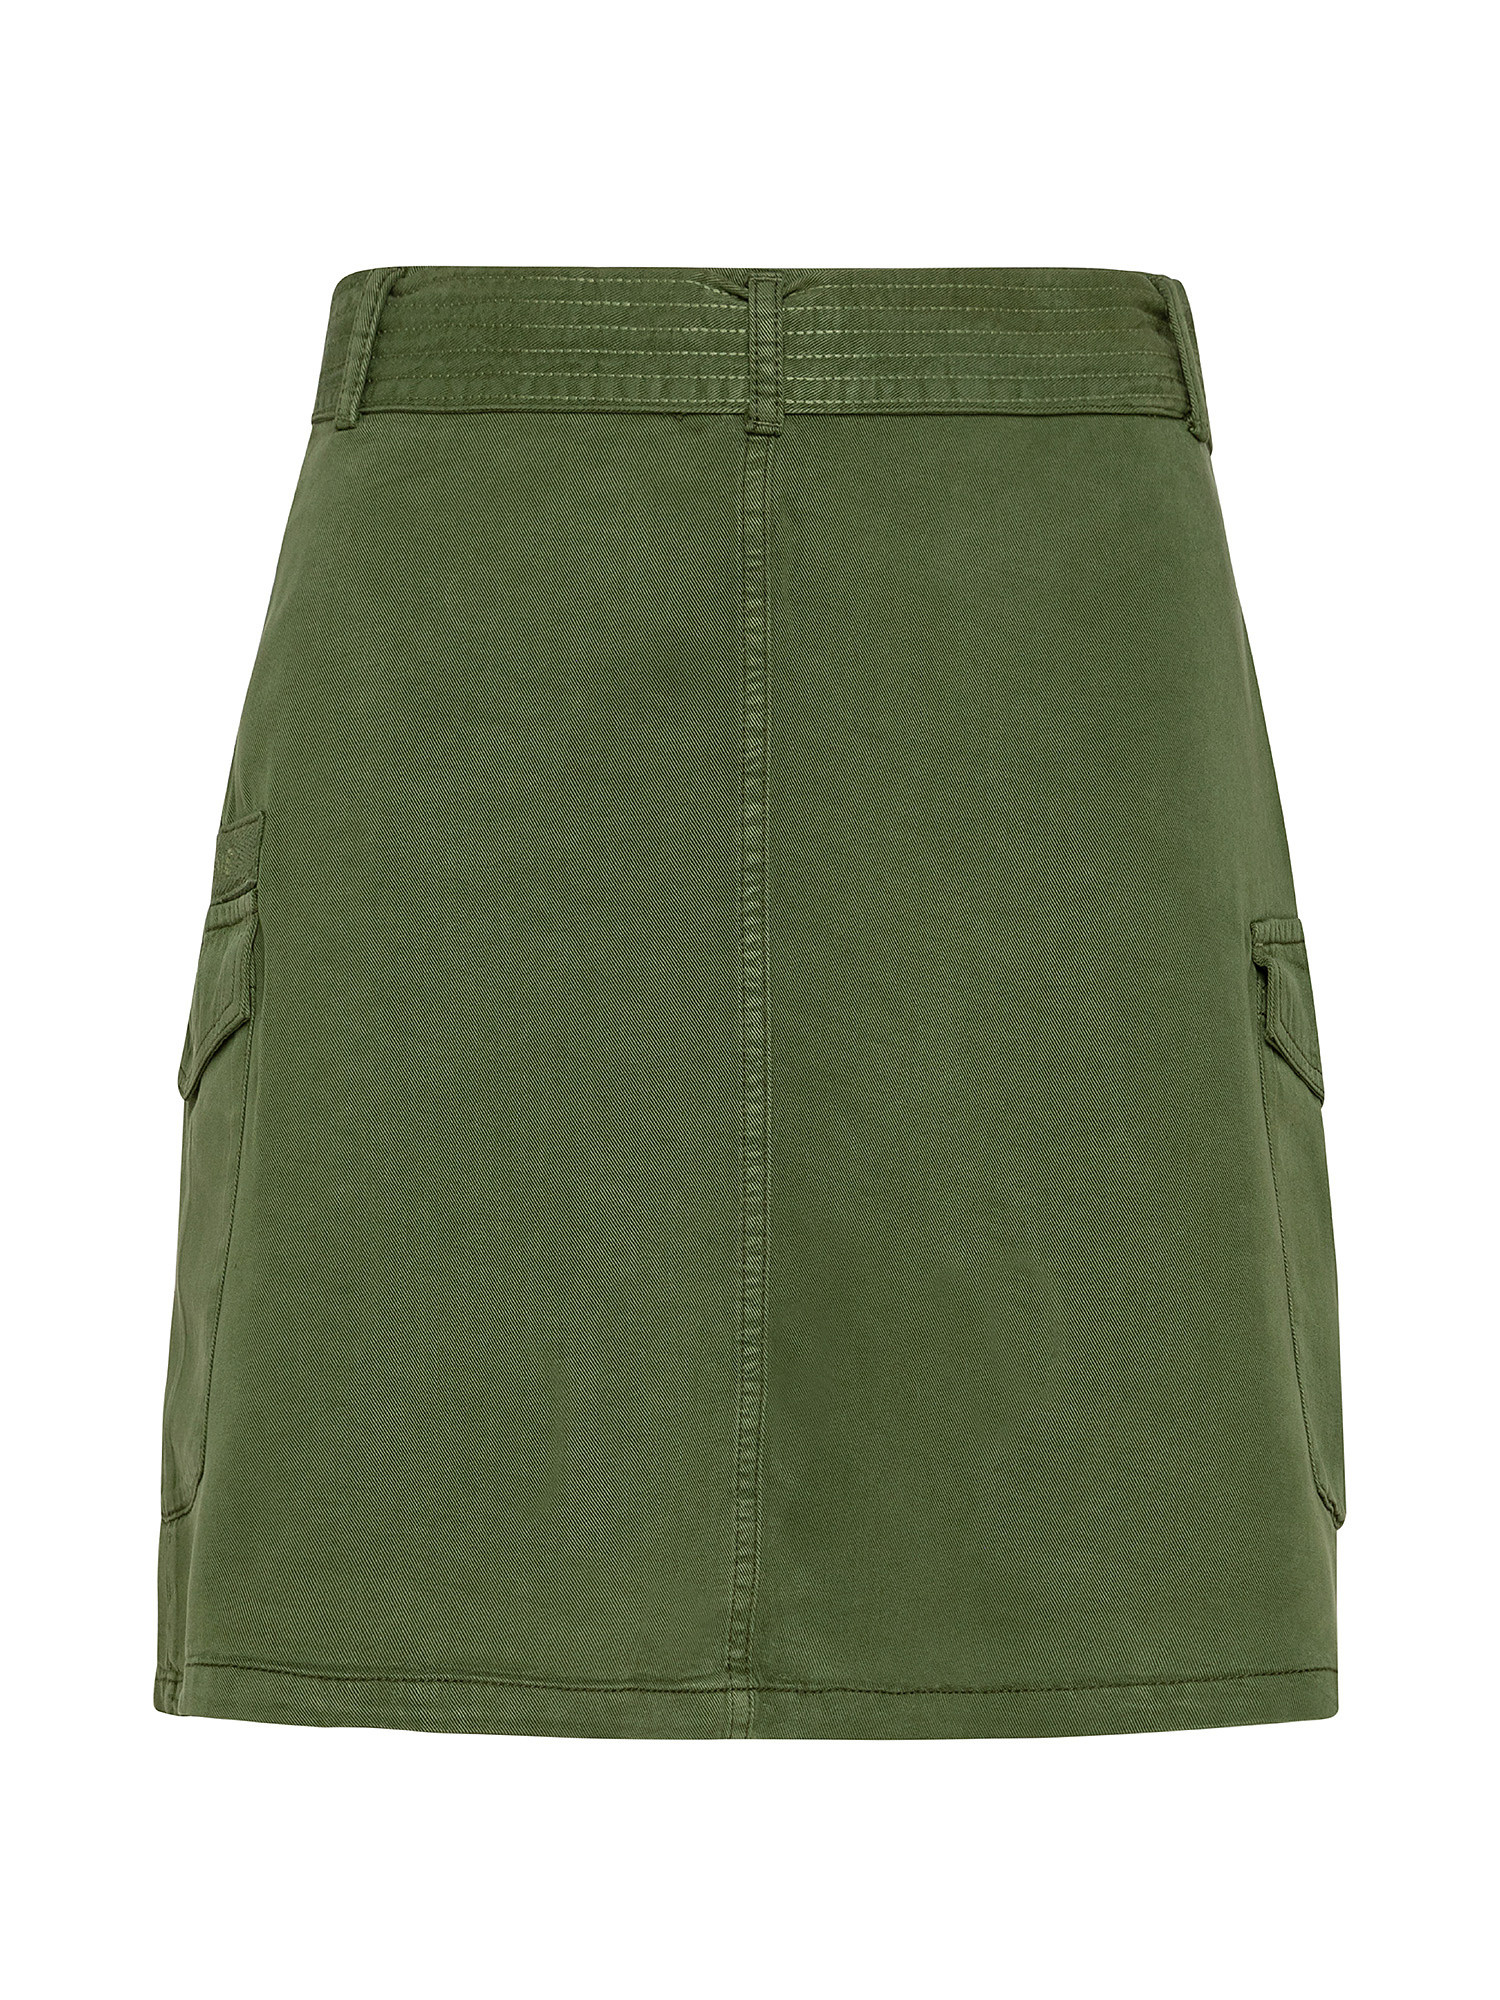 Floren skirt with zip, Green, large image number 1